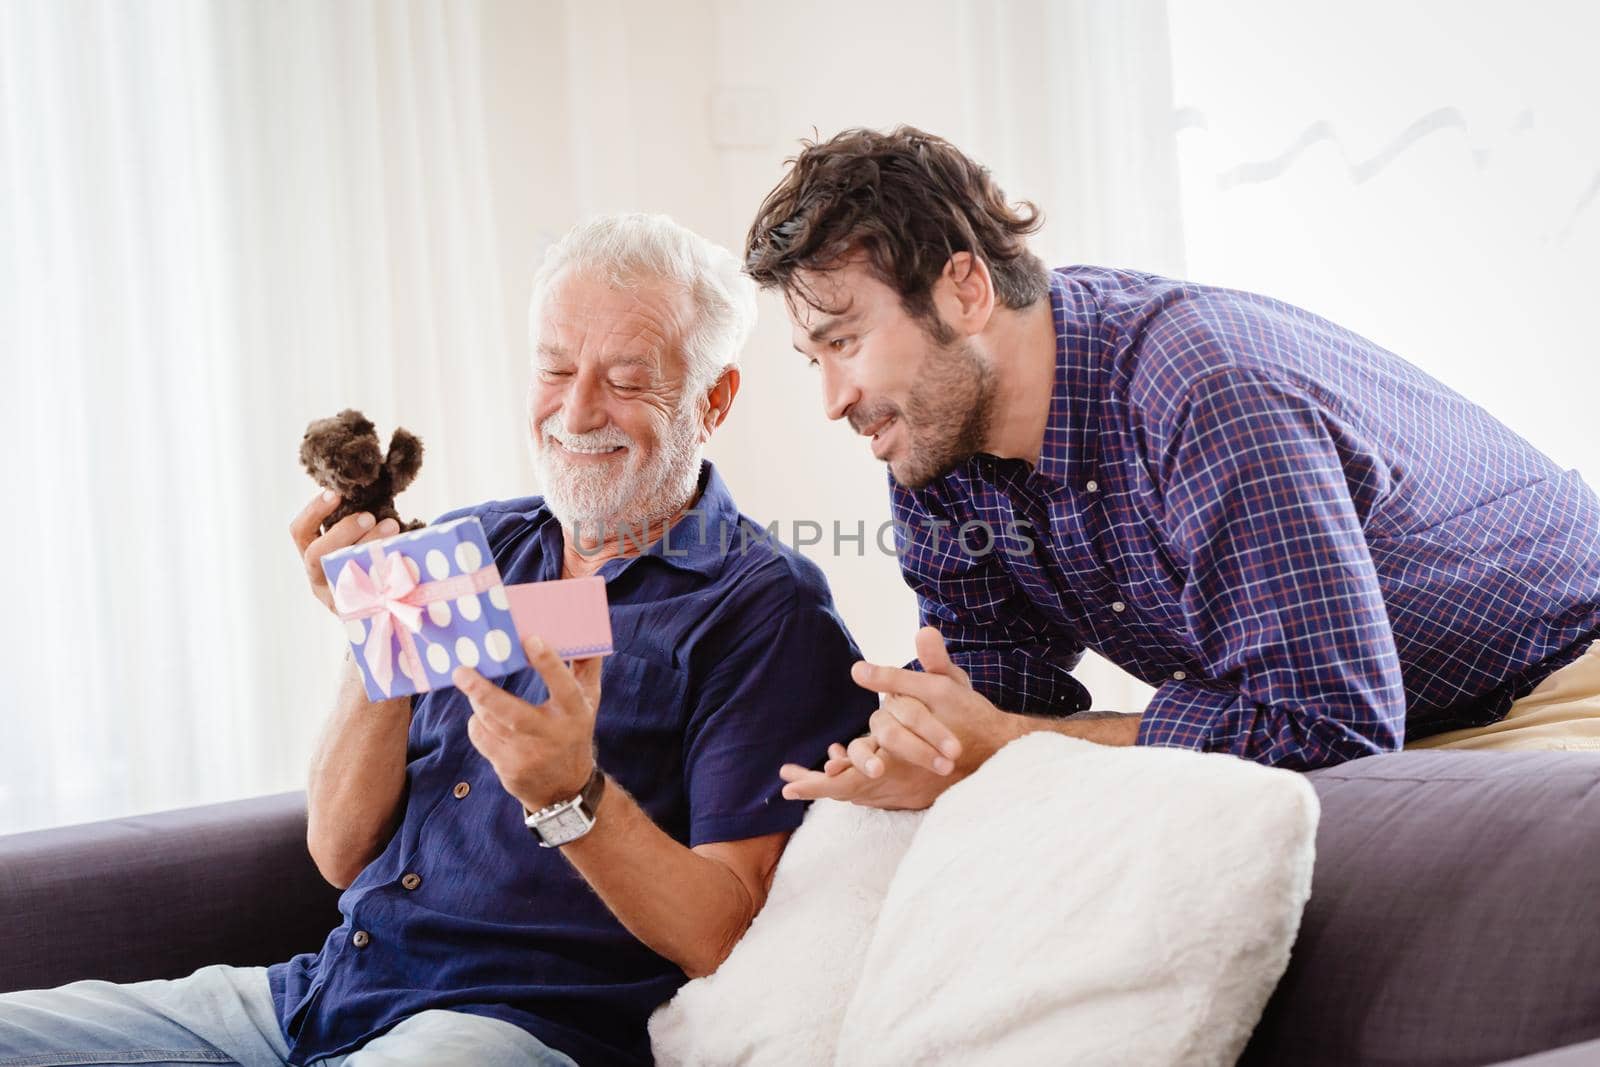 young man returned family home during the New Year's holiday with a cute gift box to the old man, Elder smiled and was very happy with teddy present. by qualitystocks